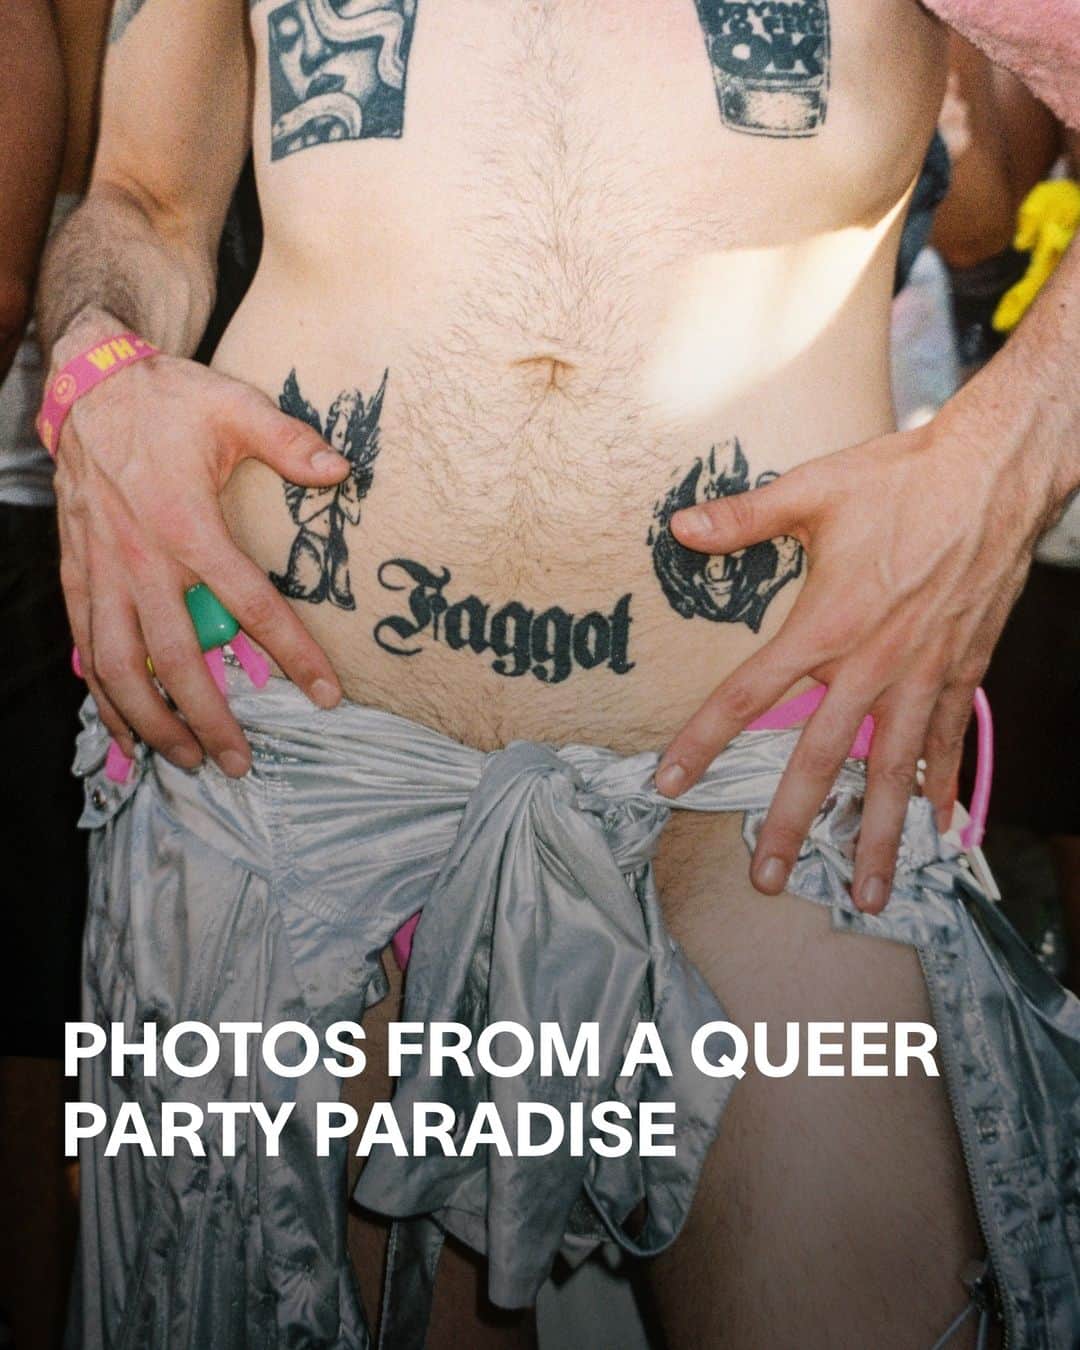 VICEのインスタグラム：「Whole Festival is truly a queer party paradise.   For three days every August, 8,000 people descend on a drab former mining site in the German countryside, transforming it into a joyous, sweaty, glitter-drenched techno utopia. There are darkrooms in the forest, beaches to strip off and stretch out on, and a general sense of love and acceptance you’re unlikely to find at many other festivals.  Dani d’Ingeo (@remainsofd) sent us their photos from this year’s party.」